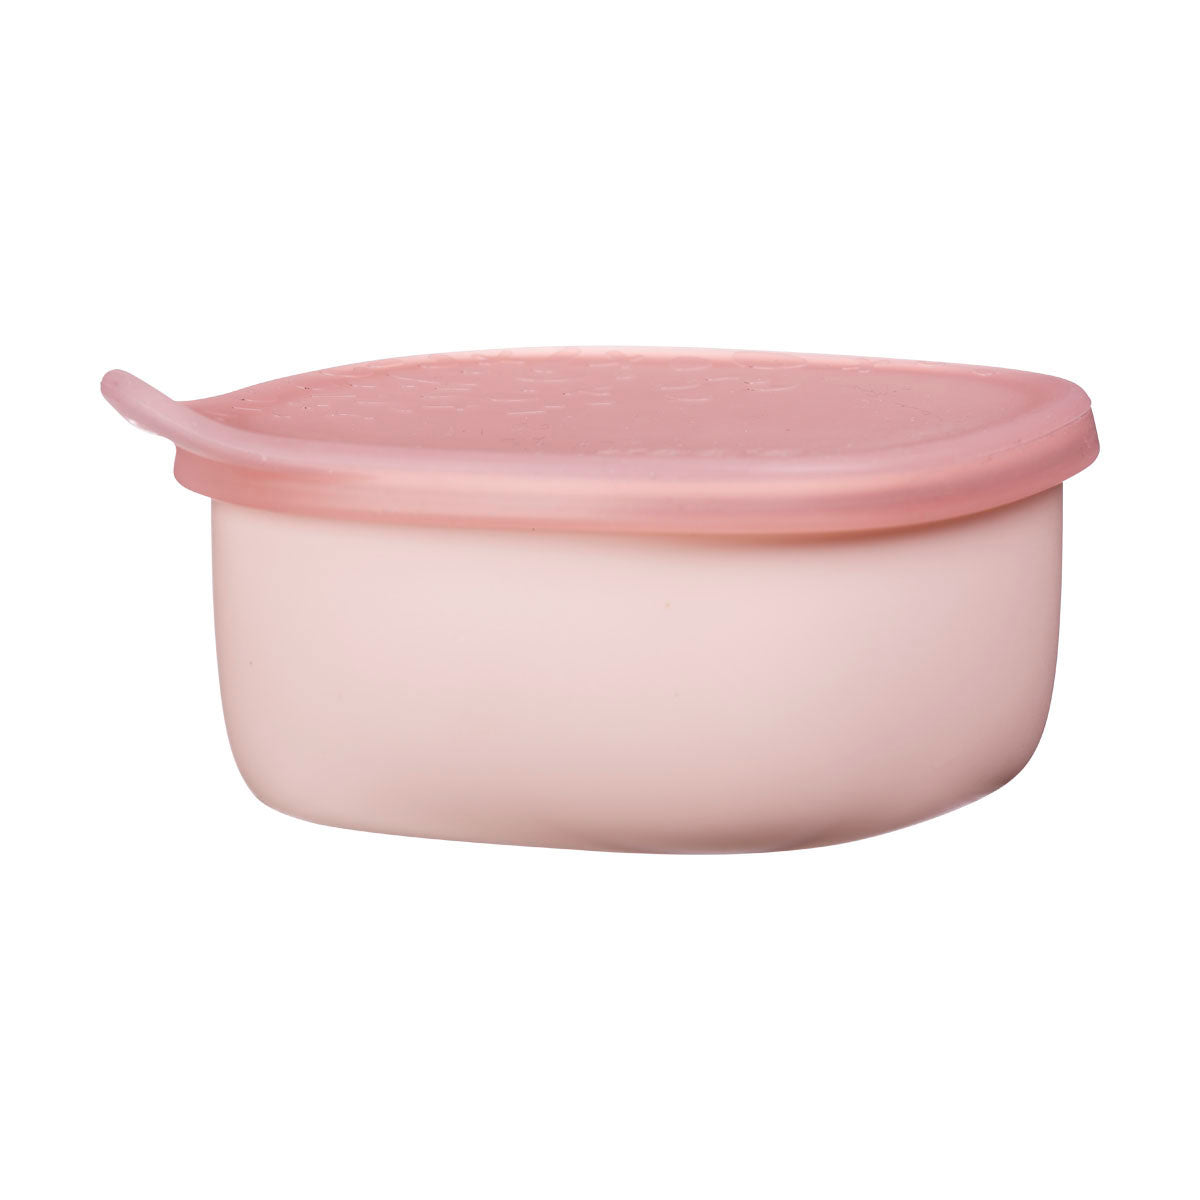 b.box Lunch Tub (assorted colours)